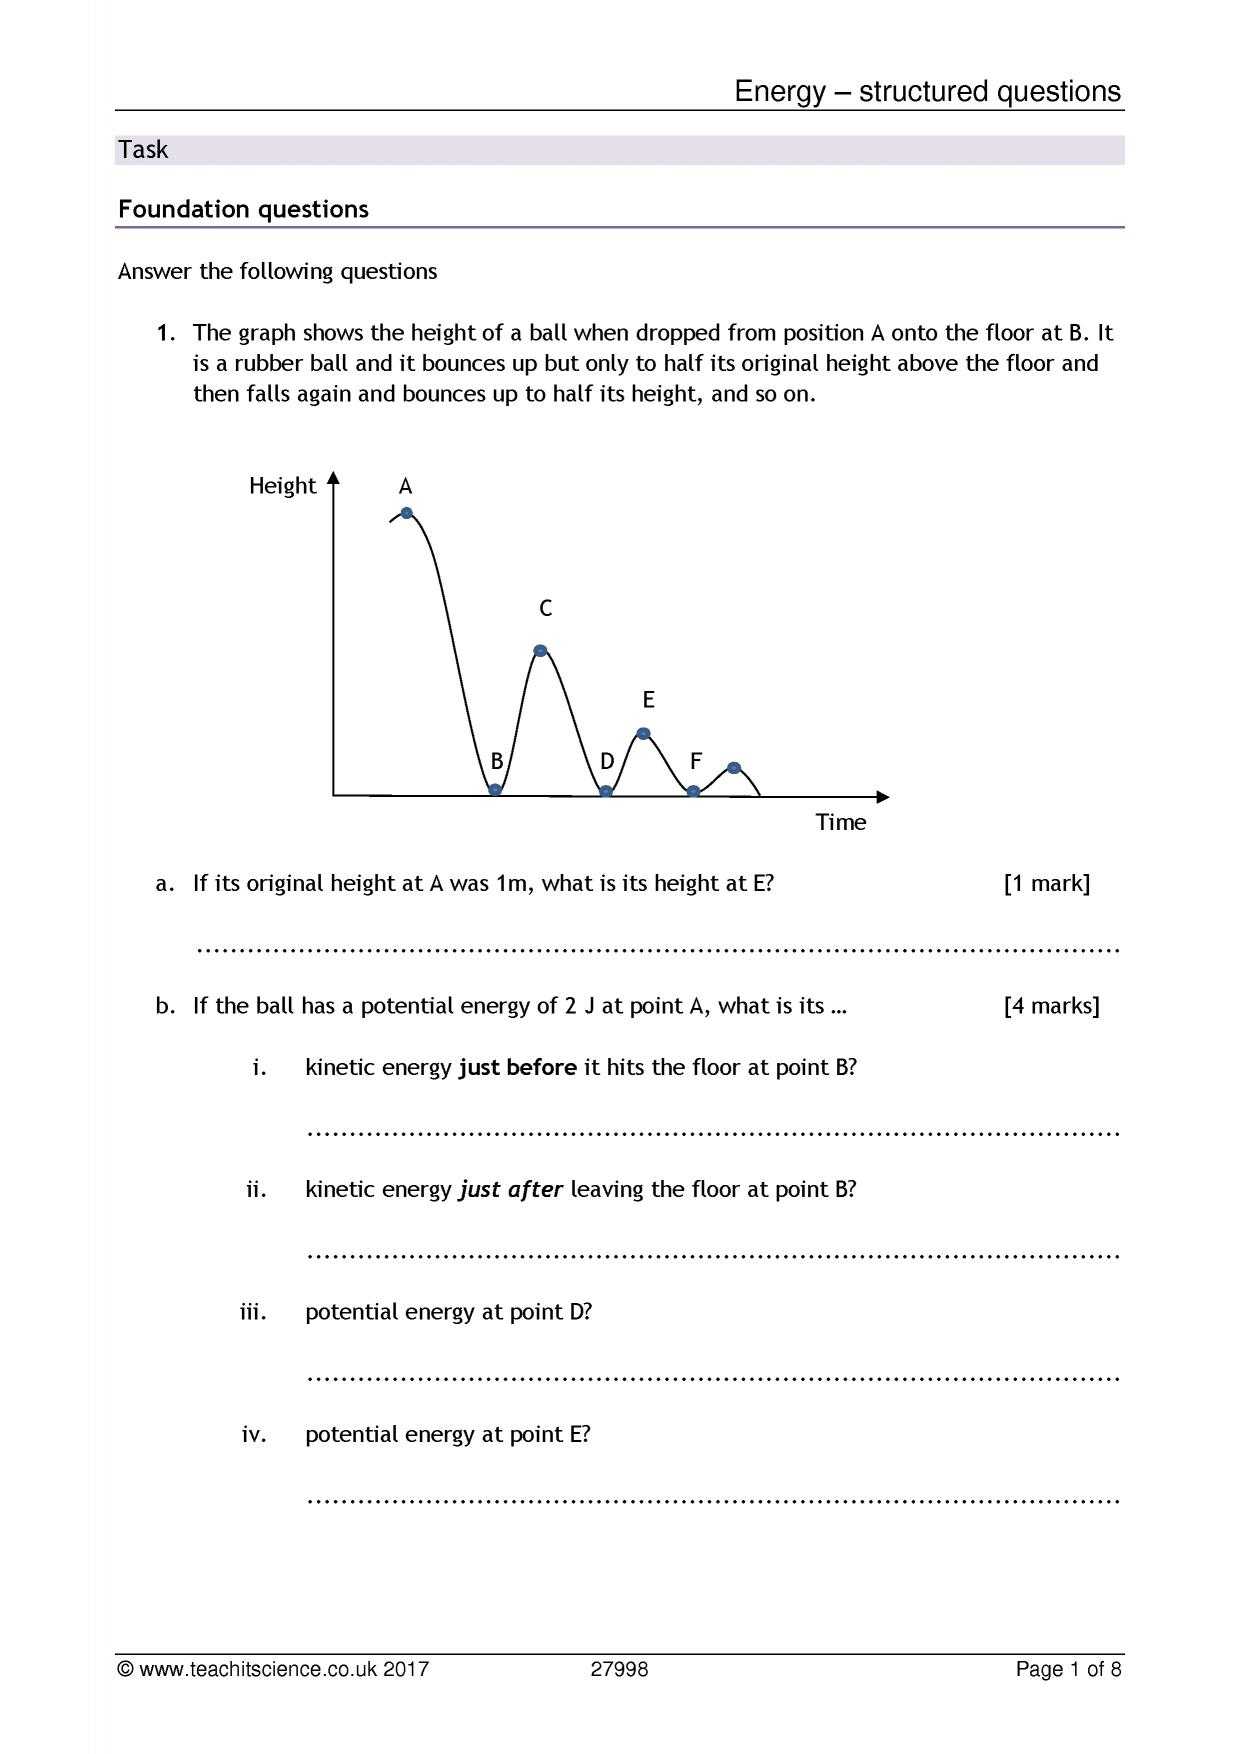 Energy Transfer In the atmosphere Worksheet Answers and Question Hunt Search Results Teachit Science